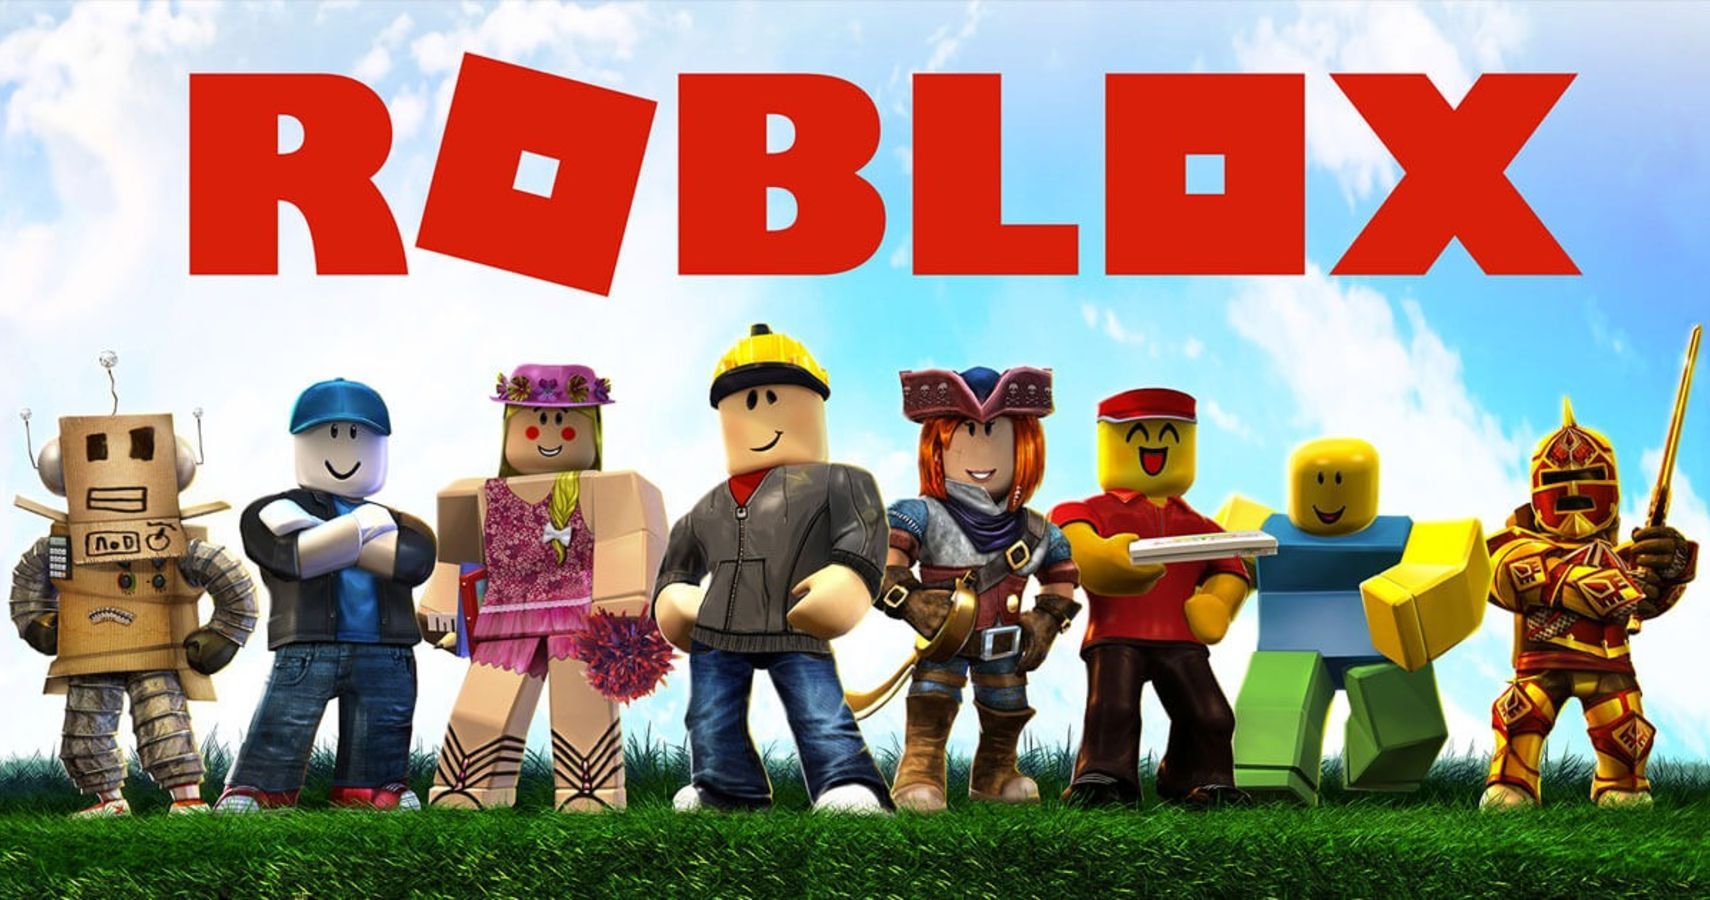 when was the newer Roblox made